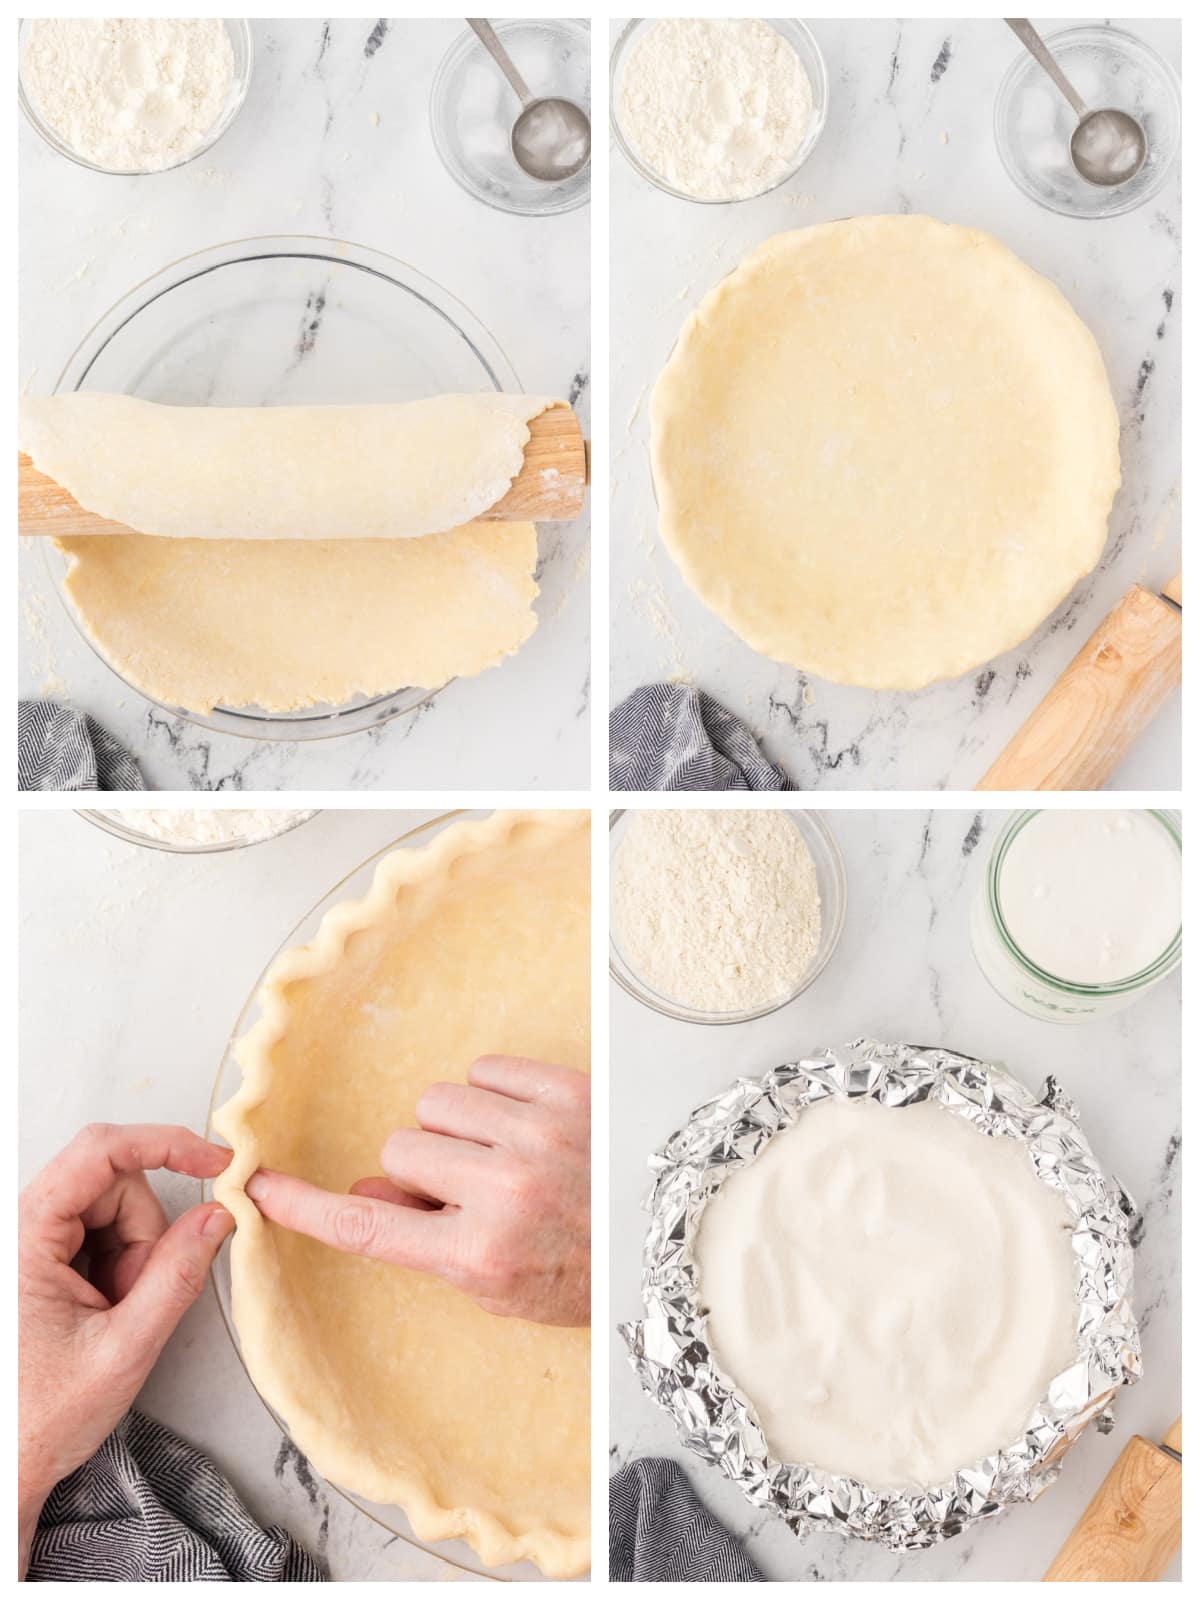 A step by step image showing how to roll and shape a pie crust for blind baking.